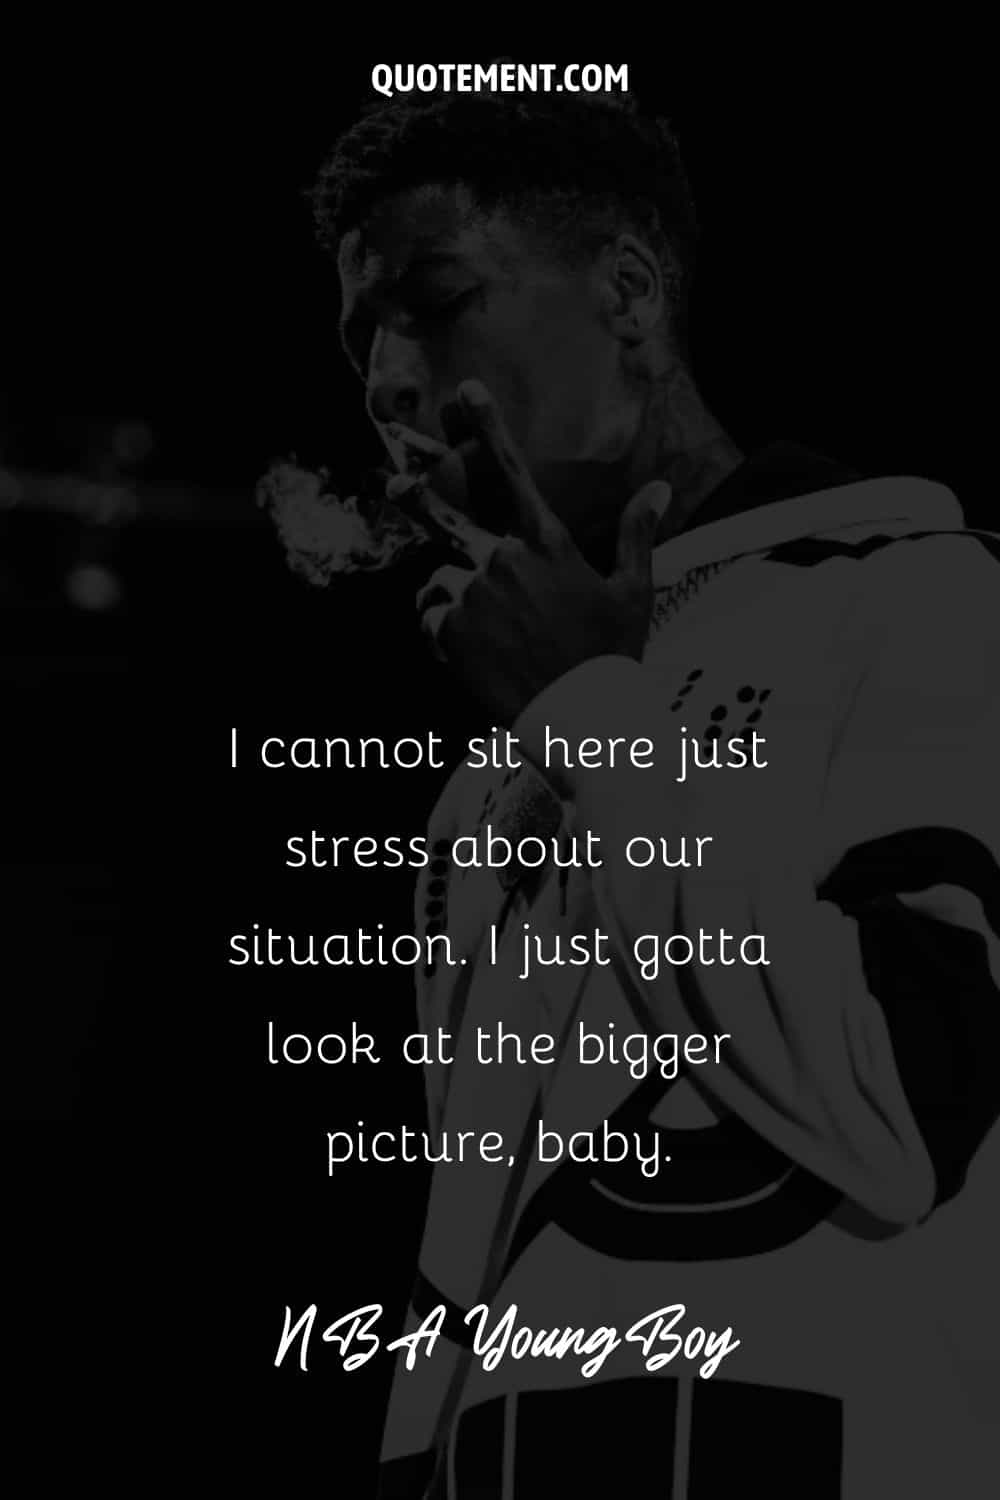 Artist smoking on stage representing yb quotes